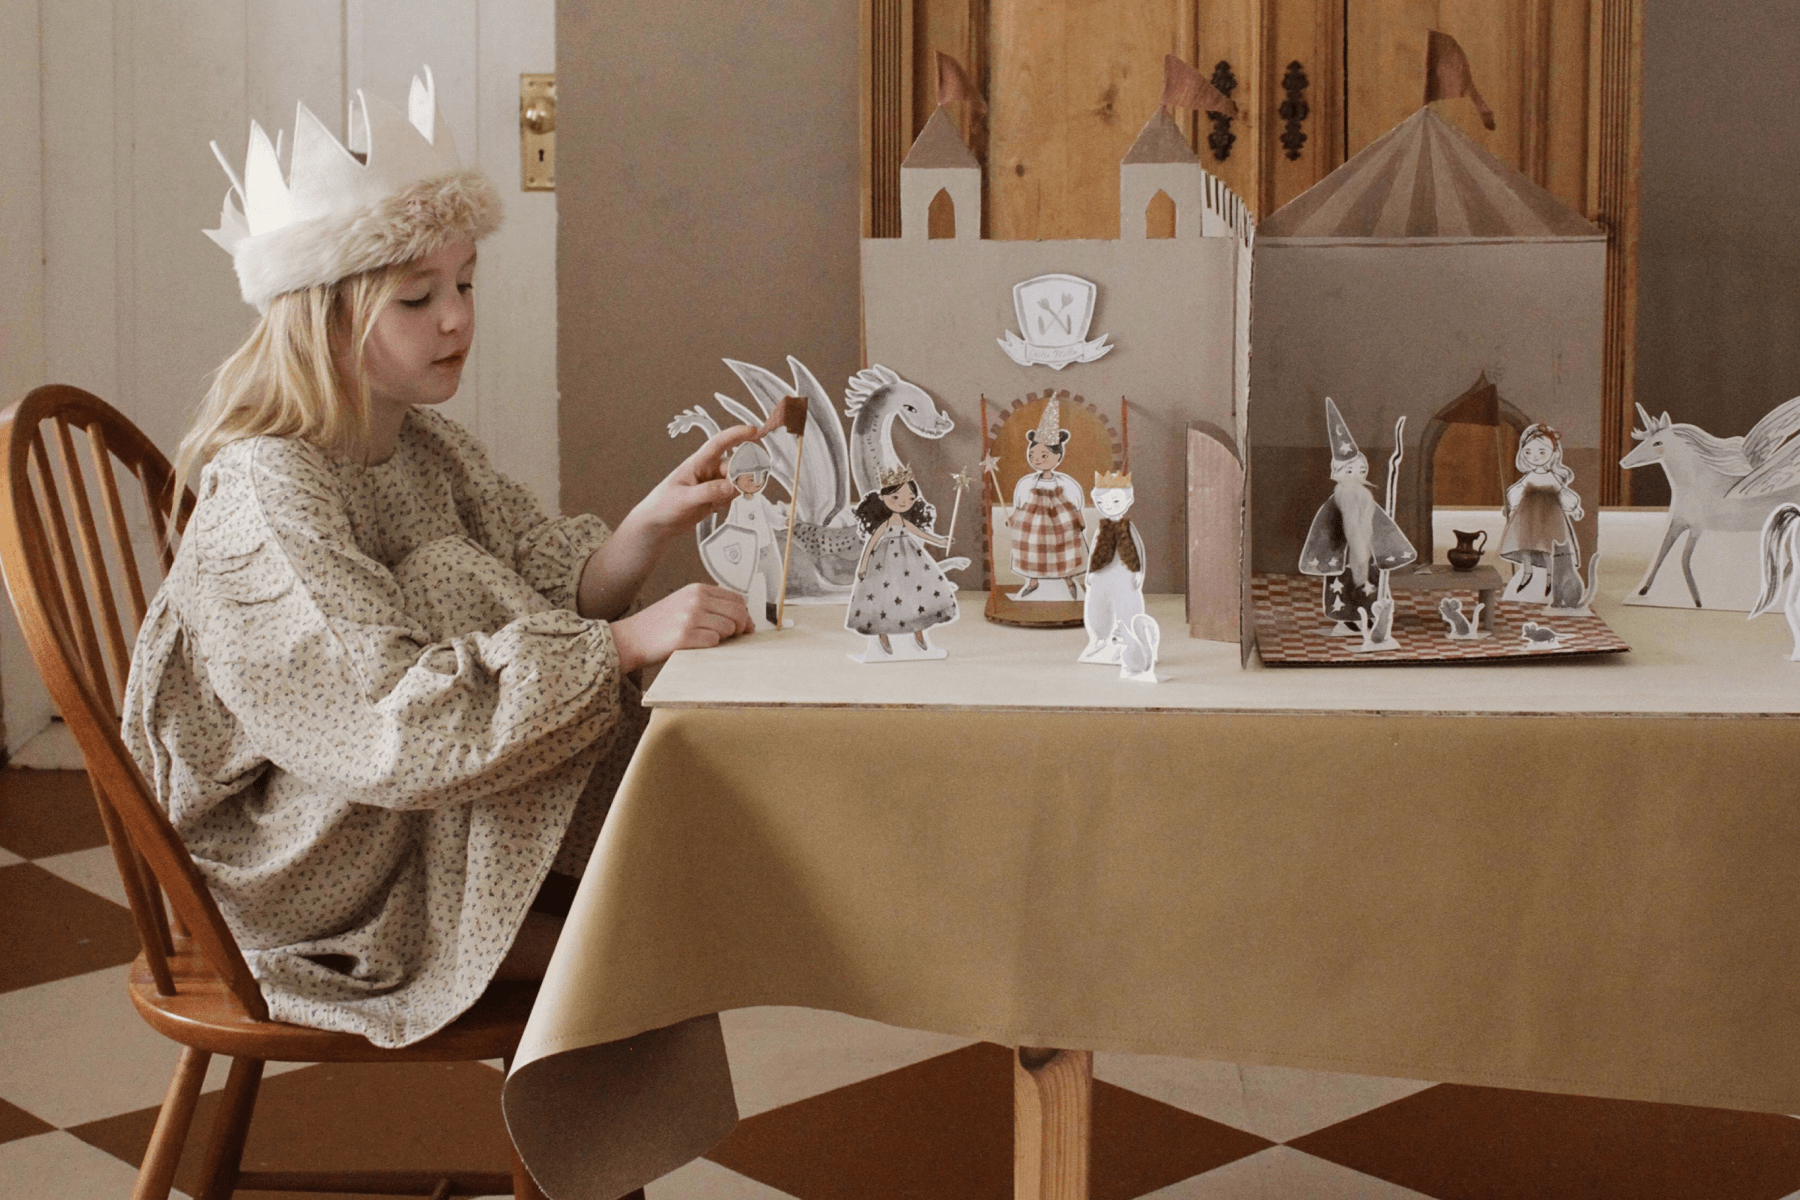 Young girl in a paper crown sits at a kitchen table and plays with a paper cutout castle and illustrated paper dolls.